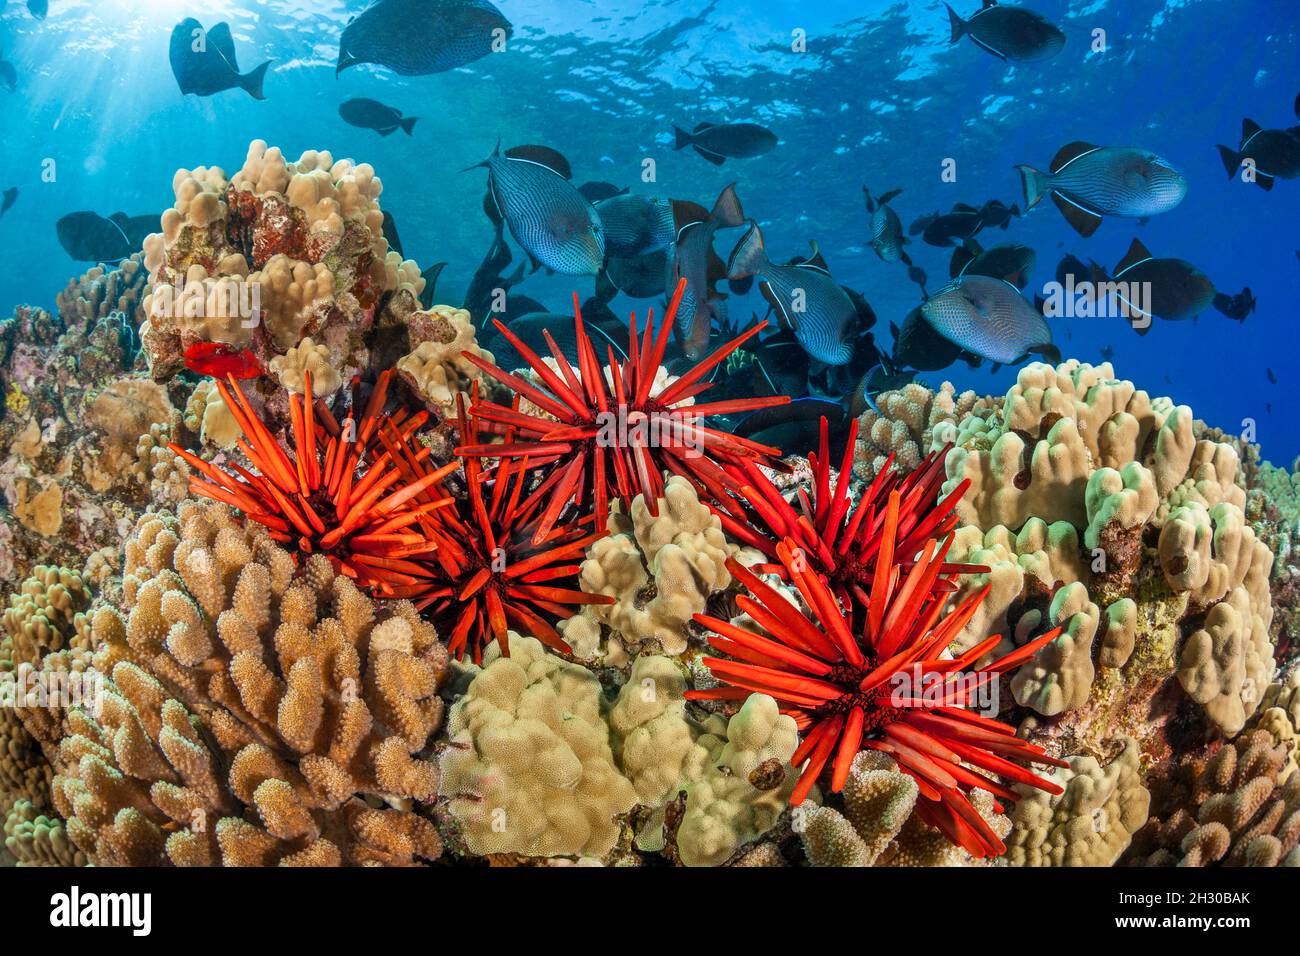 Slate pencil sea urchins, Heterocentrotus mammillatus, color the foreground of this Hawaiian reef scene with black triggerfish, Melichthys niger, off Stock Photo